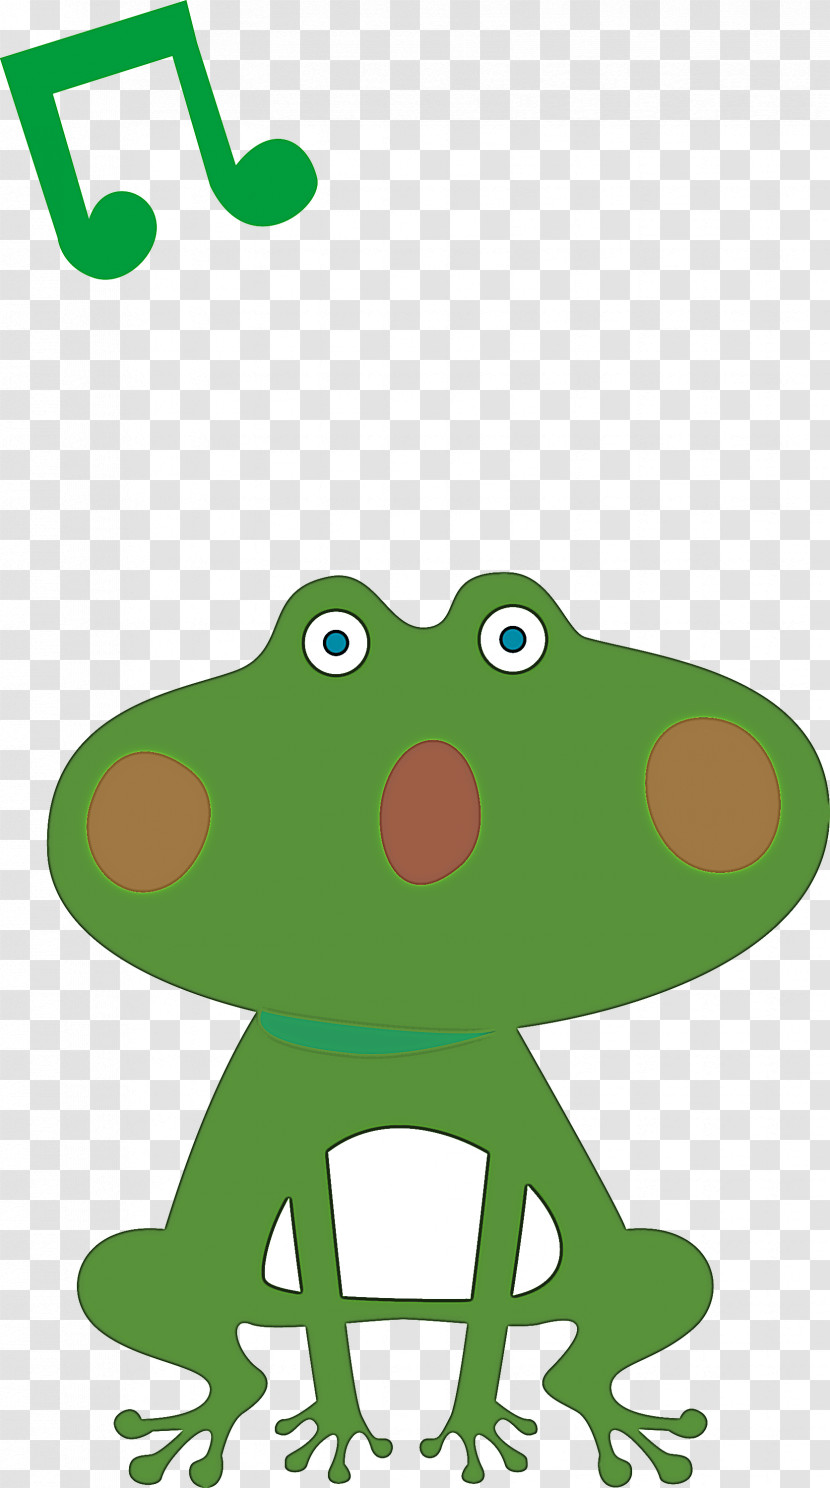 True Frog Toad Frogs Tree Frog Cartoon Transparent PNG